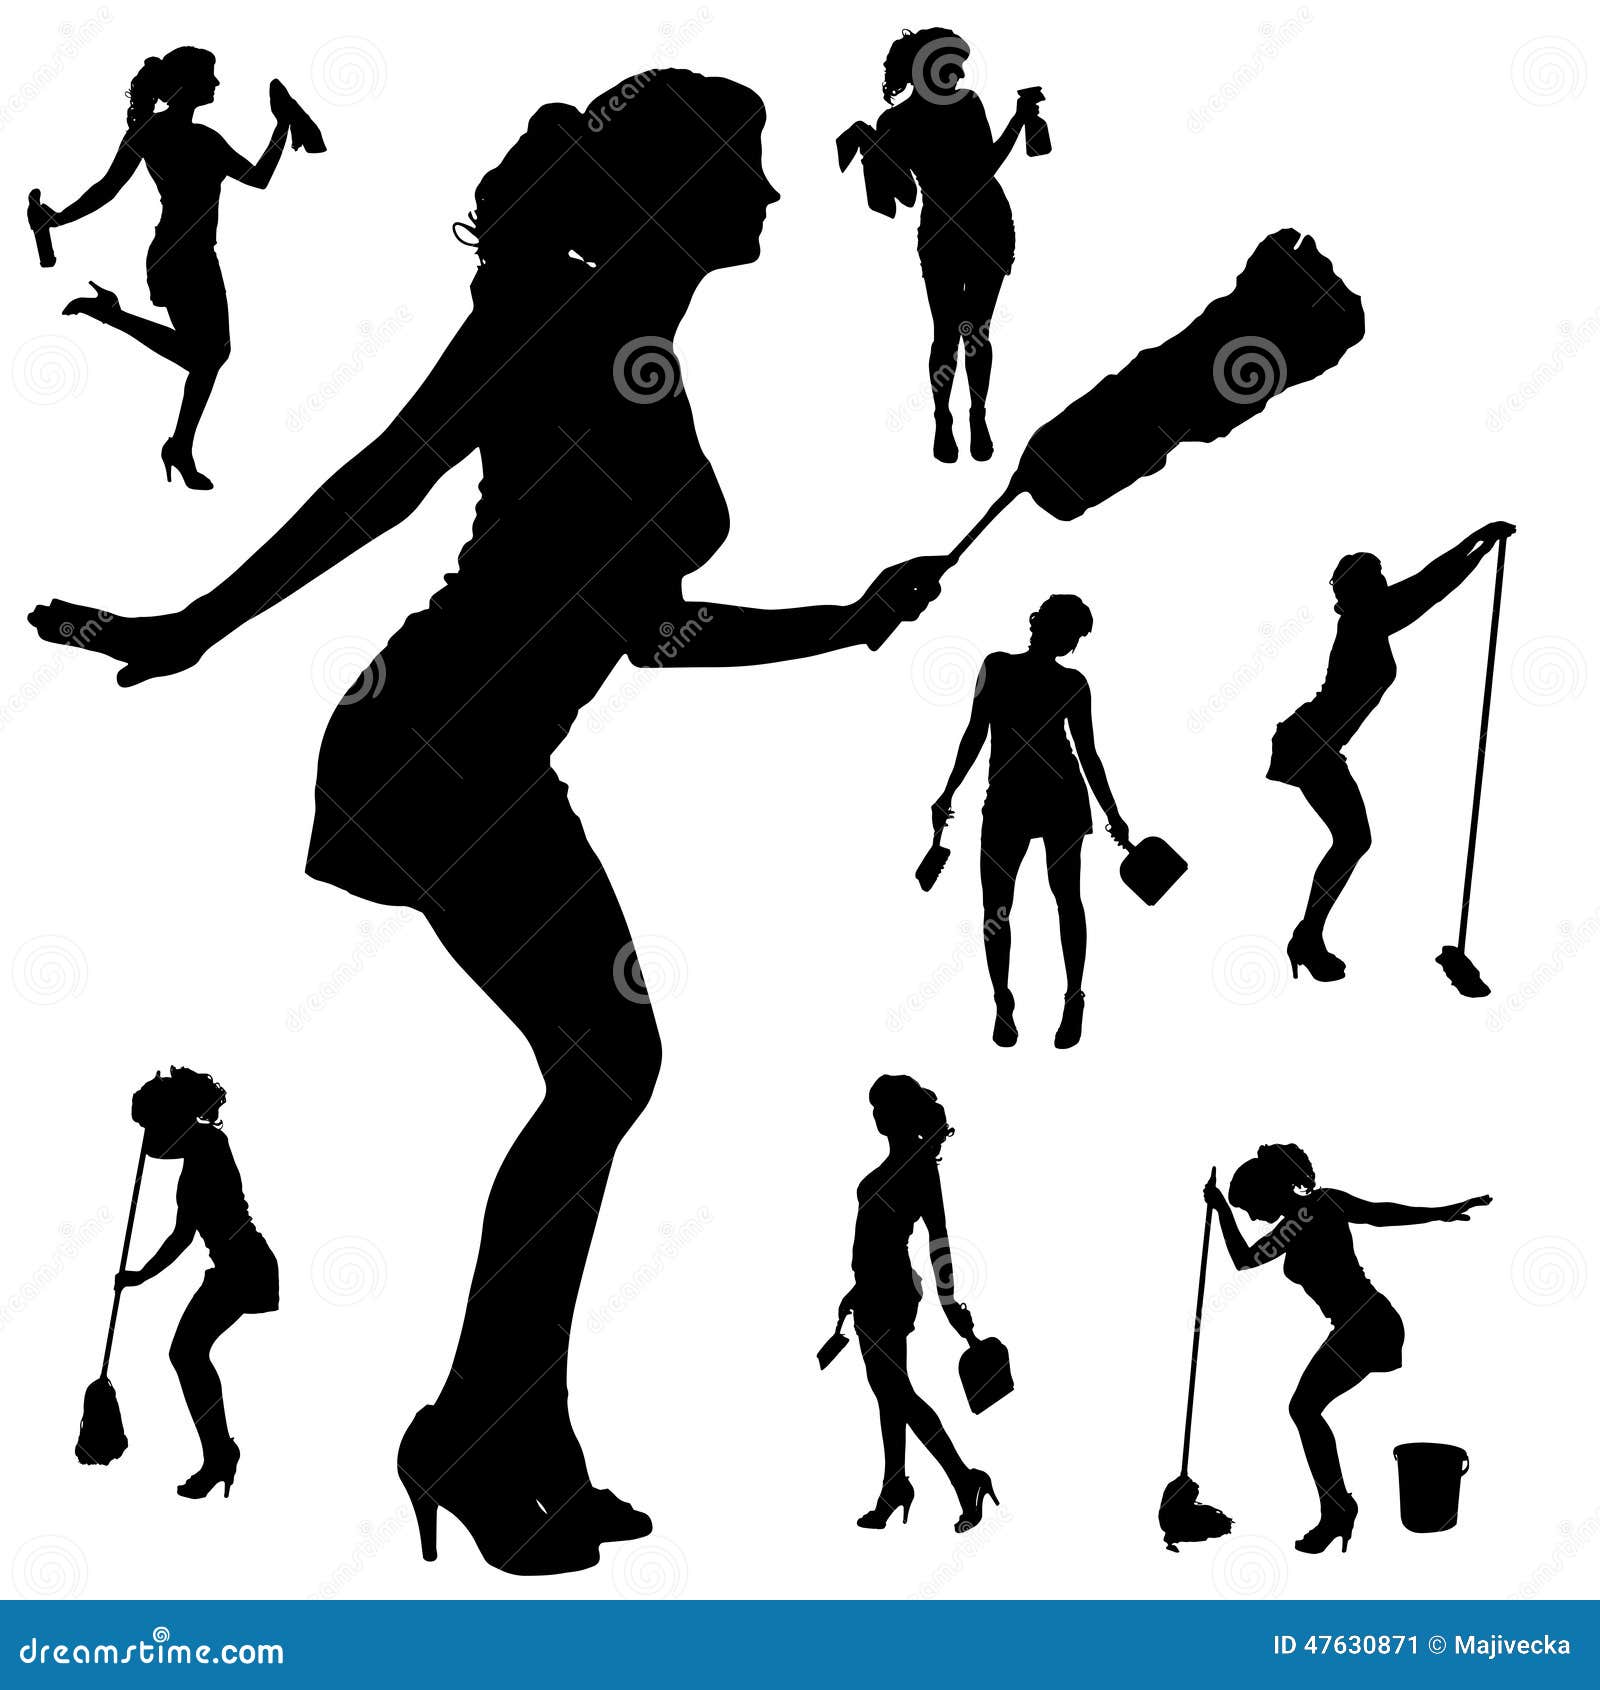 https://thumbs.dreamstime.com/z/vector-silhouette-cleaning-lady-white-background-47630871.jpg